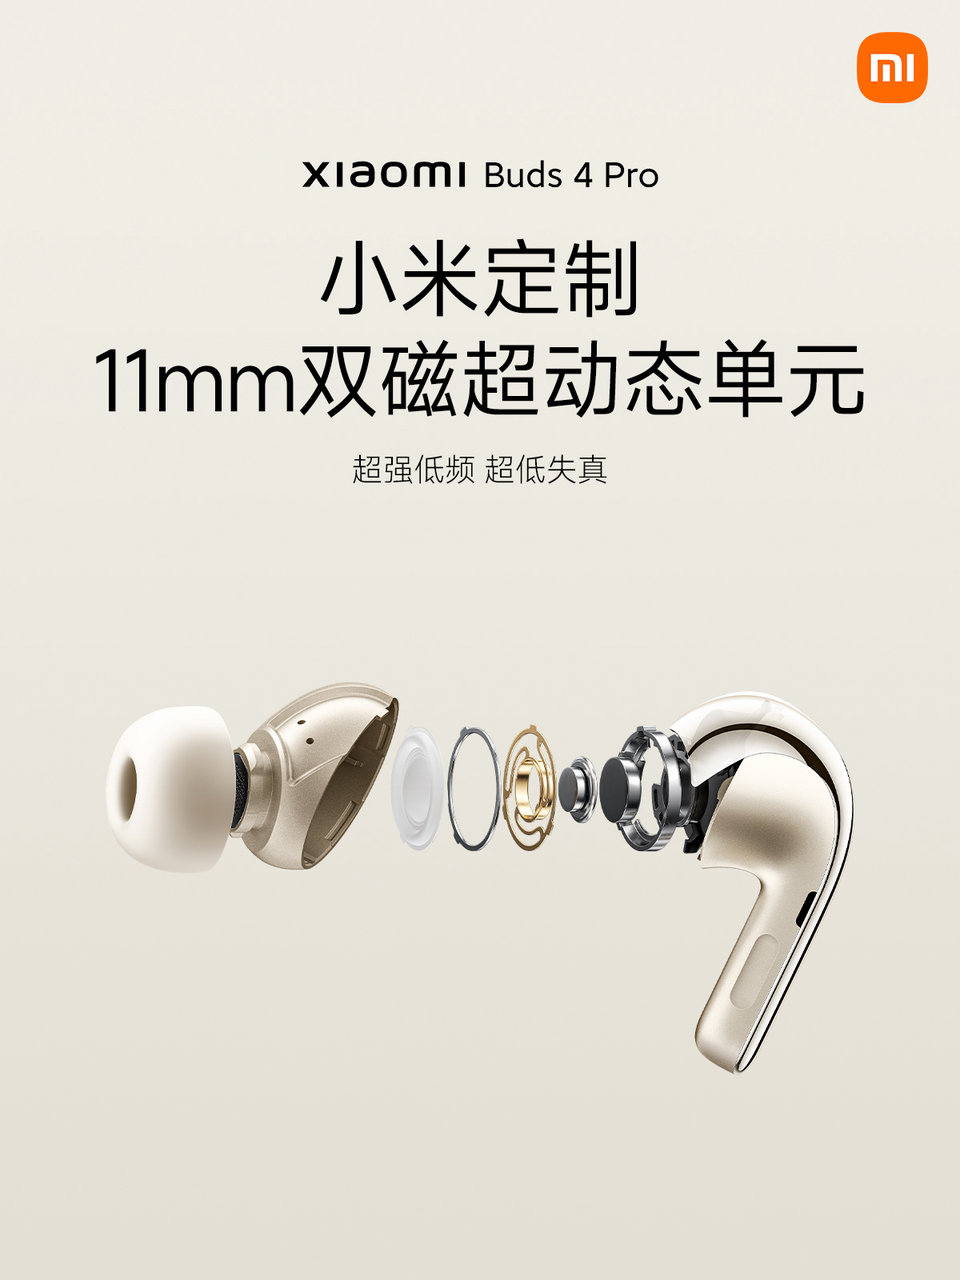 Xiaomi Buds 4 Pro Officially Launches With Spatial Audio 